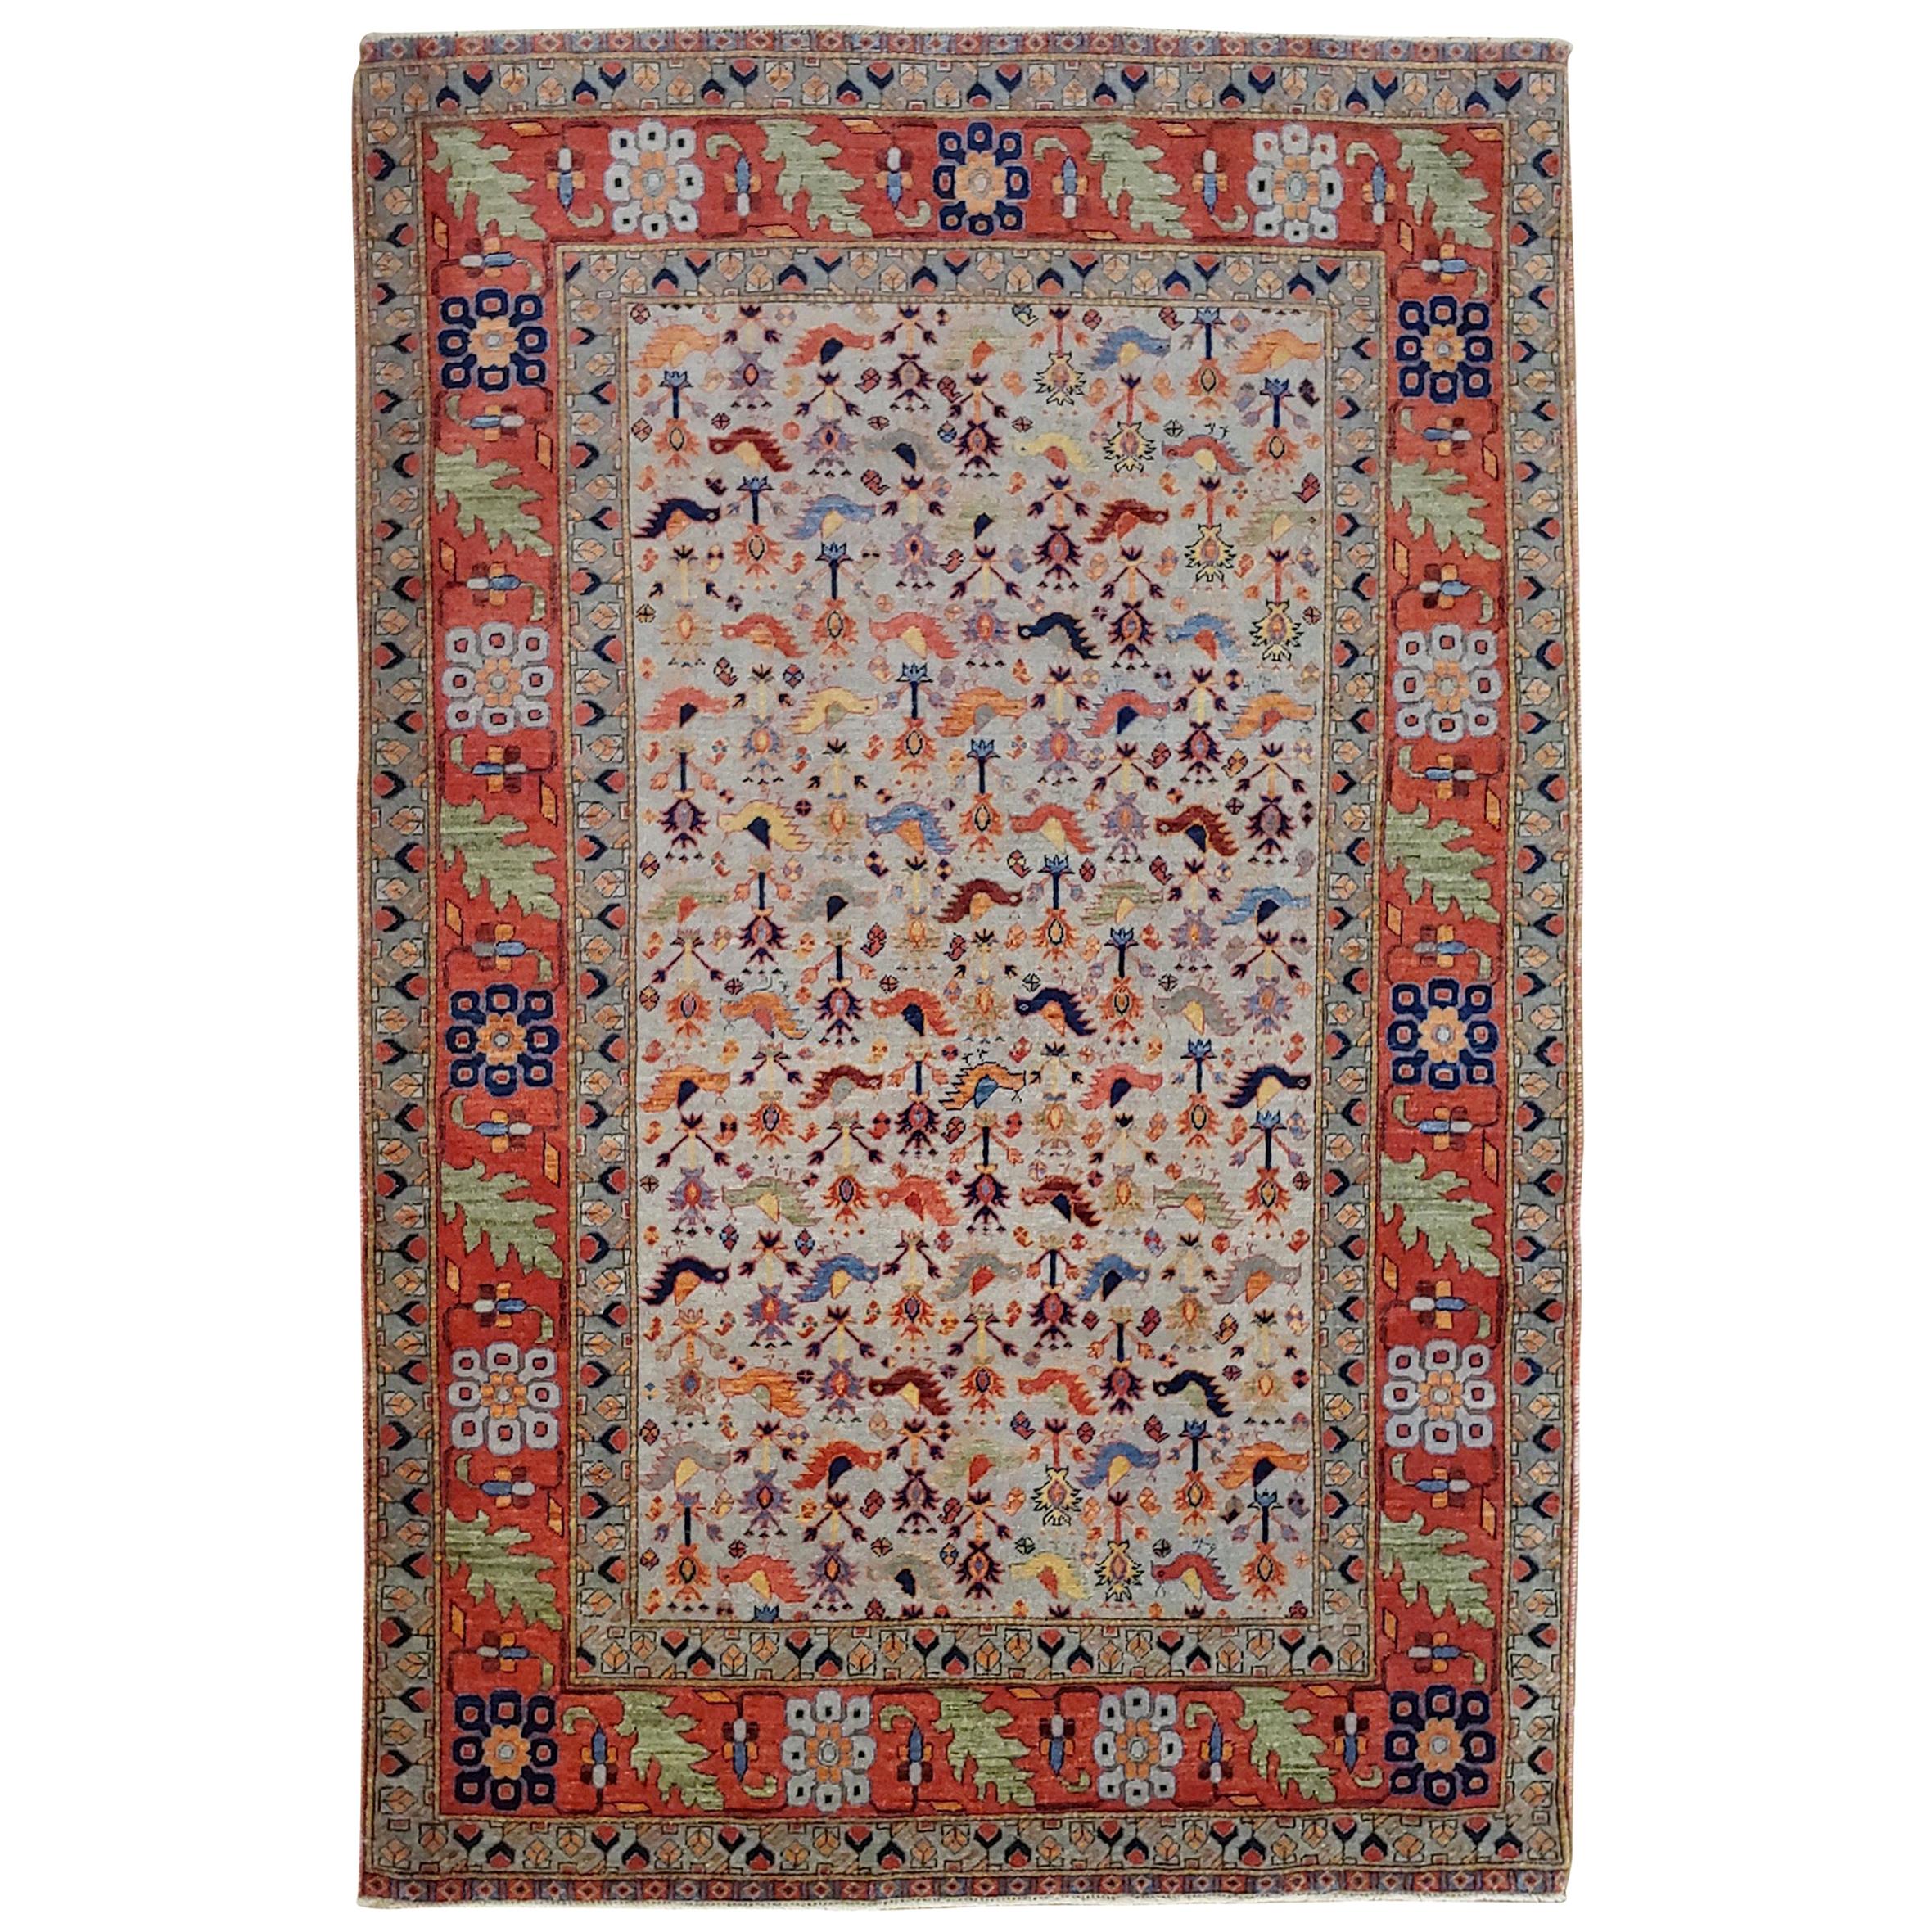 New Rug From Afghanistan, Persian Qashqai-Shiraz Design, Wool, Natural Dyes 4x6  For Sale